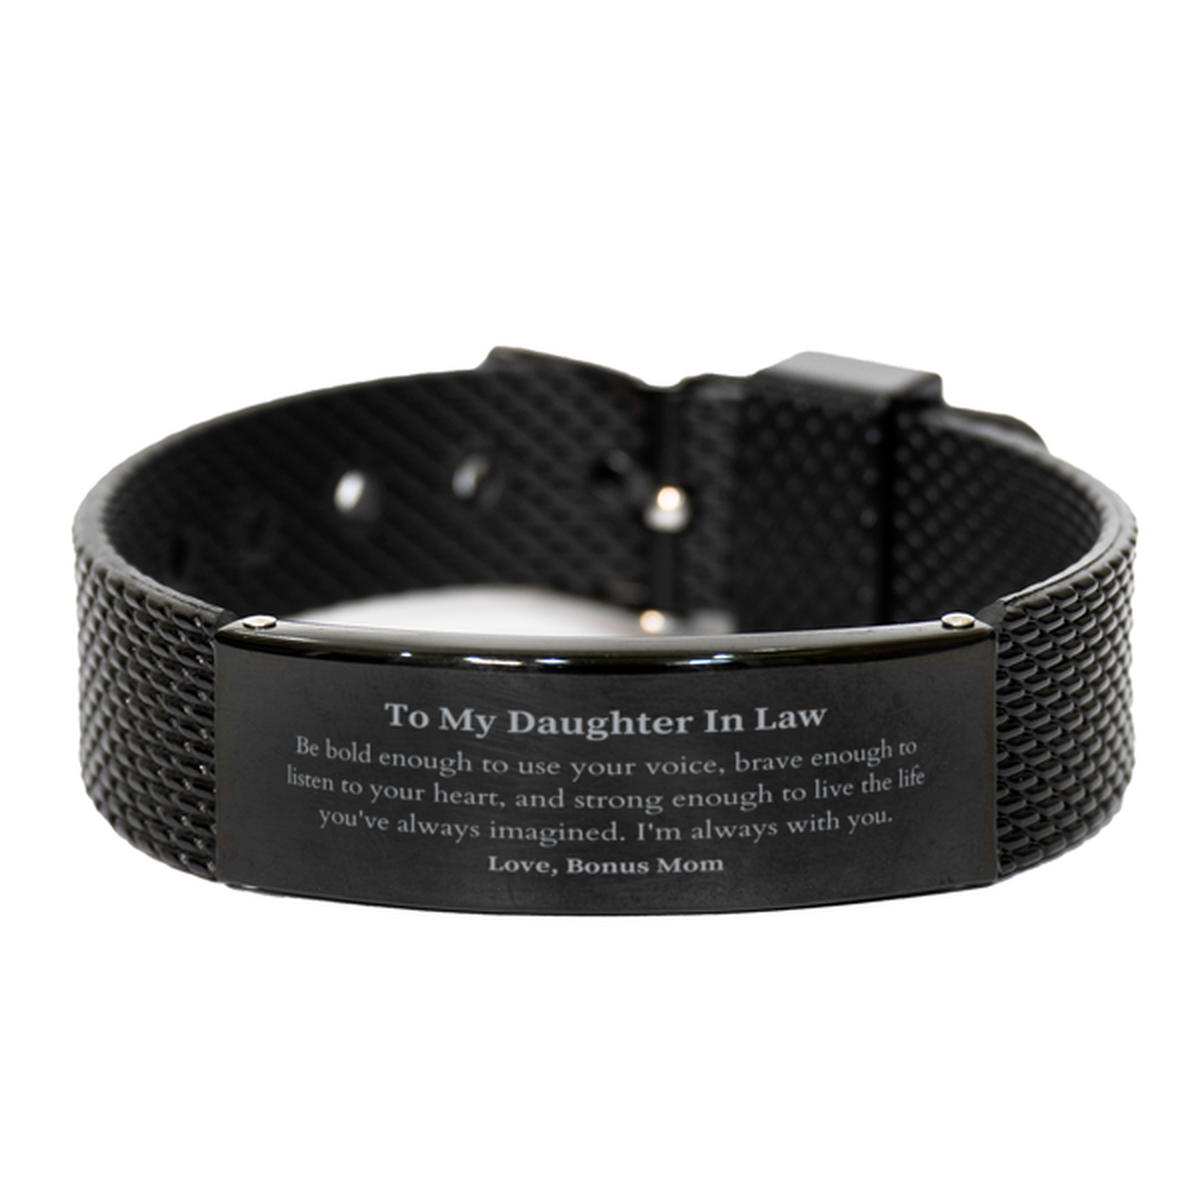 Keepsake Daughter In Law Black Shark Mesh Bracelet Gift Idea Graduation Christmas Birthday Daughter In Law from Bonus Mom, Daughter In Law Be bold enough to use your voice, brave enough to listen to your heart. Love, Bonus Mom